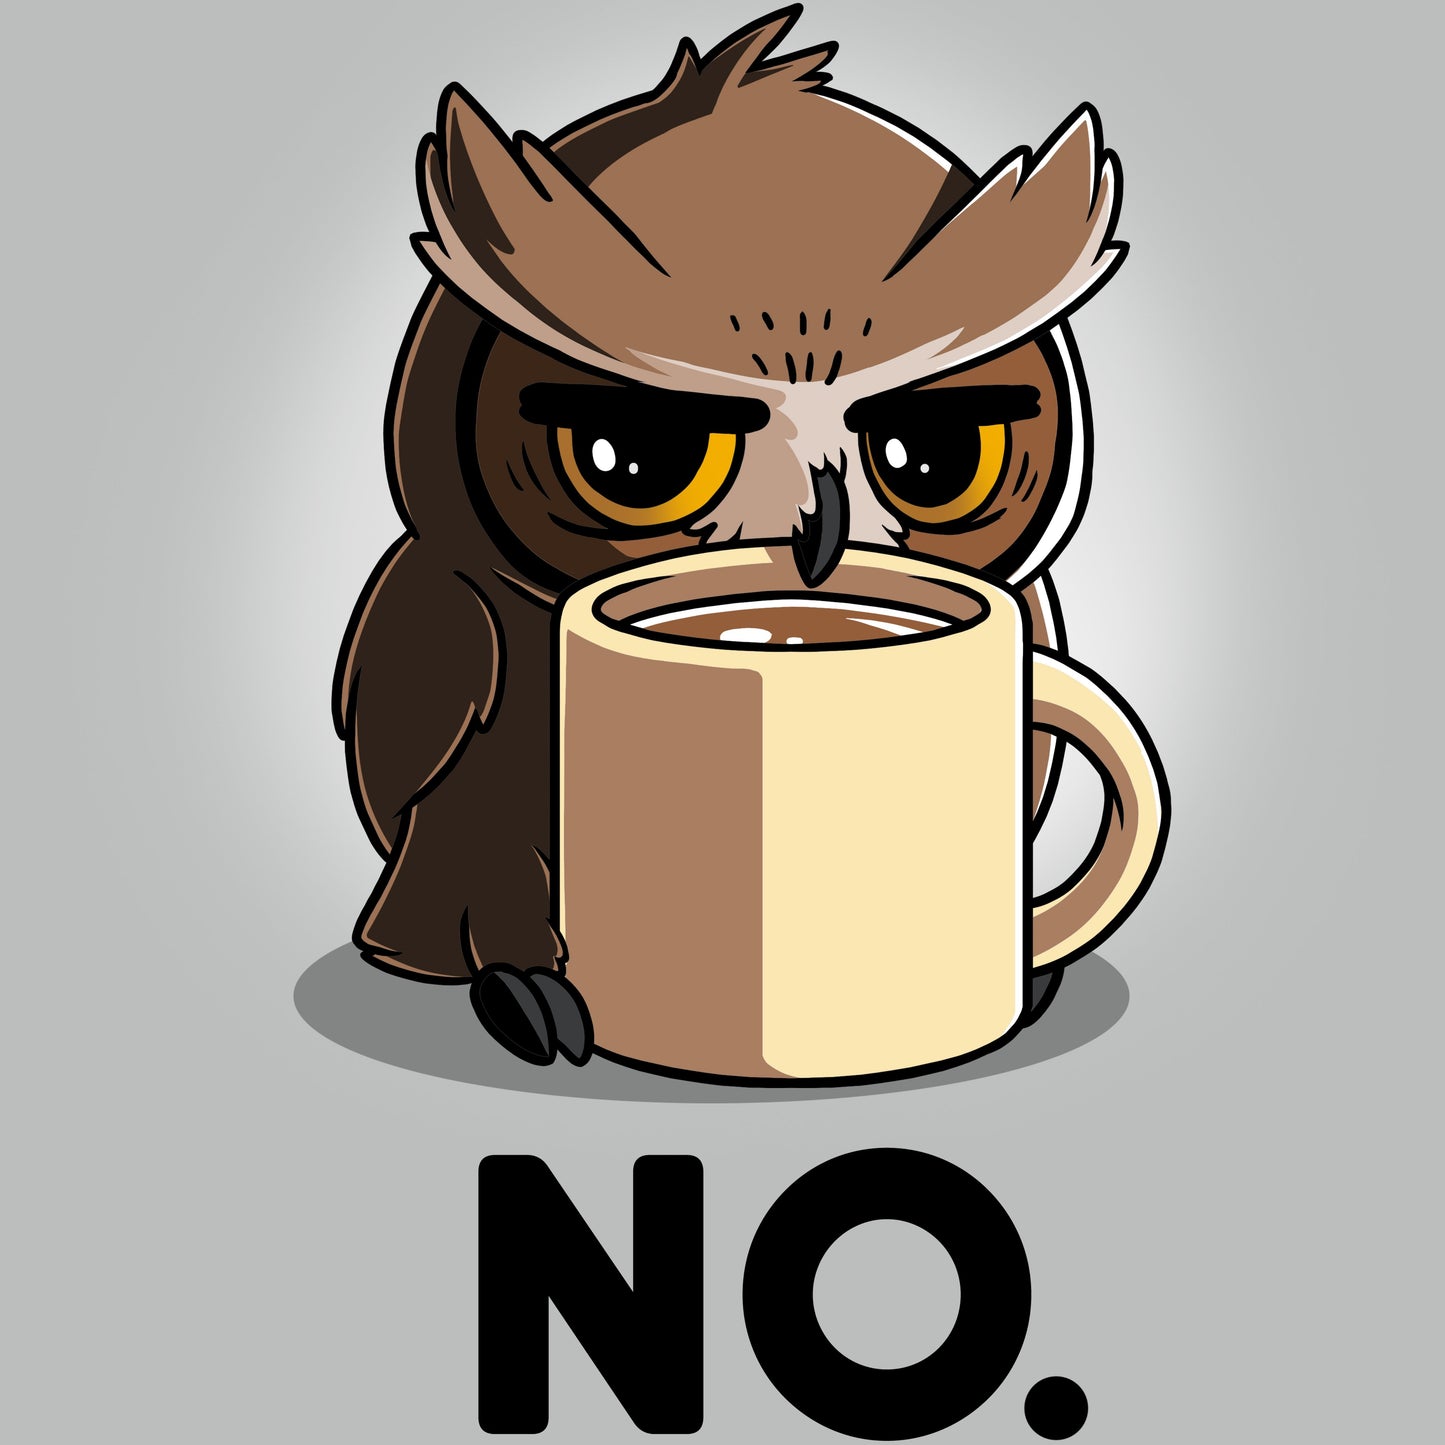 A TeeTurtle Night Owl cartoon with a coffee cup and the word "no" on a T-shirt.